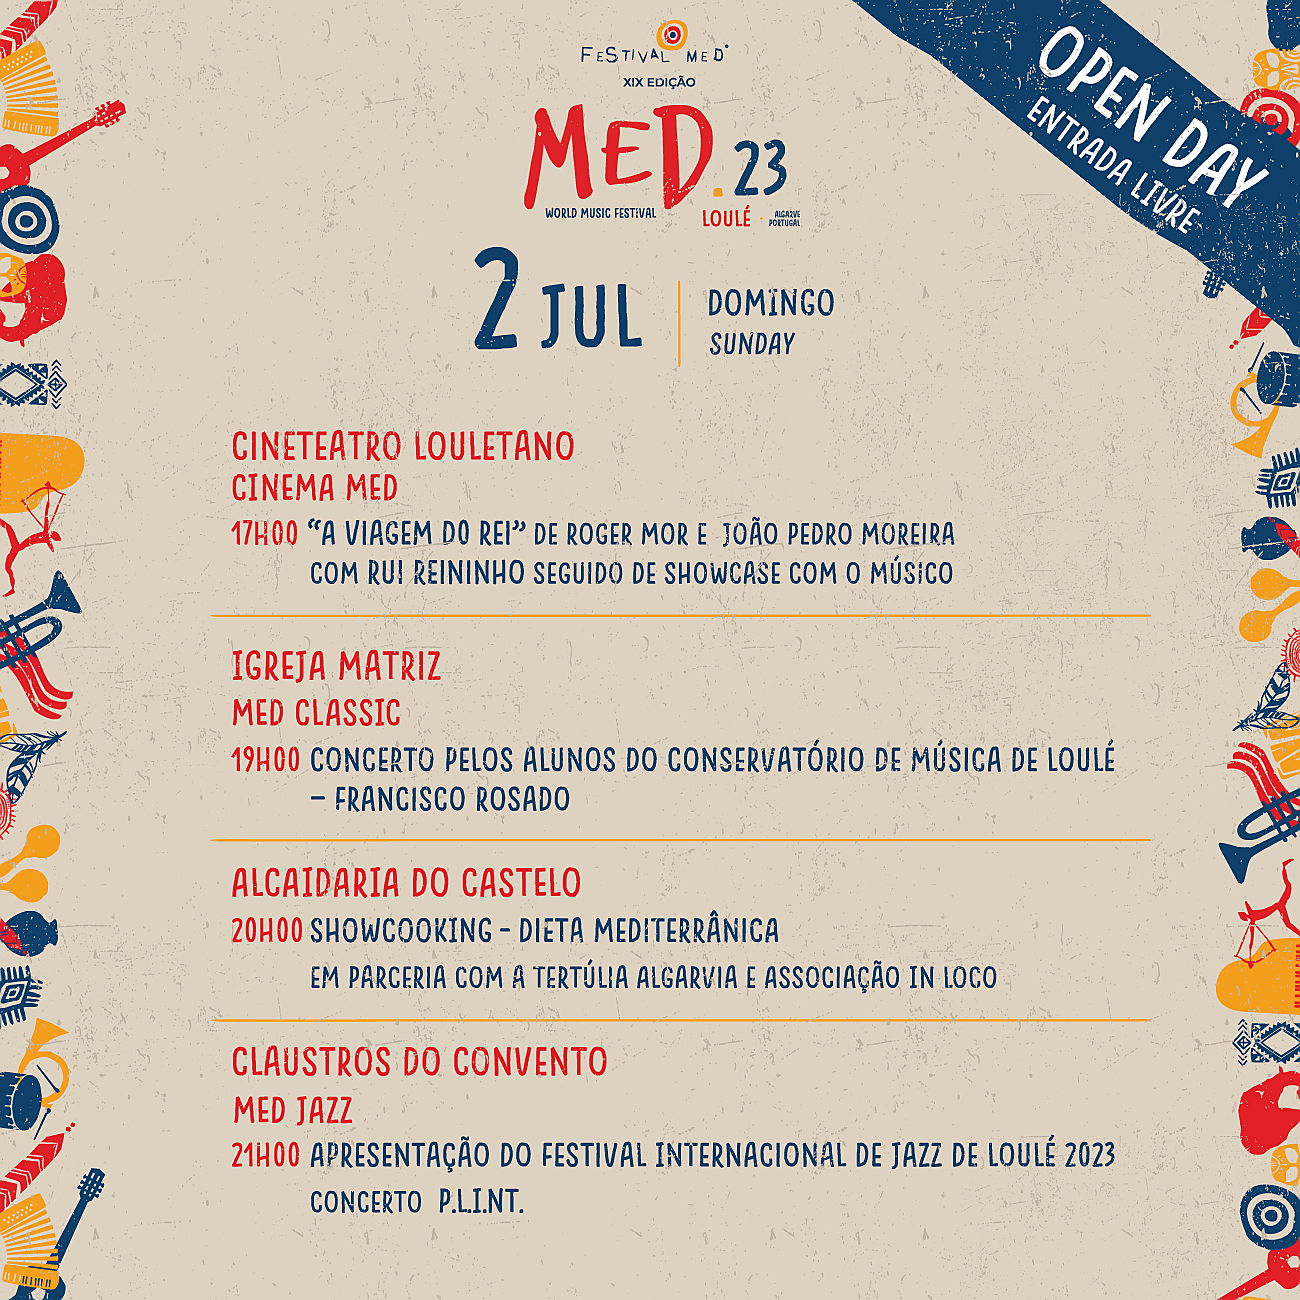  Vilamoura - Algarve
- CML-MED23-OpenDay-Square.png